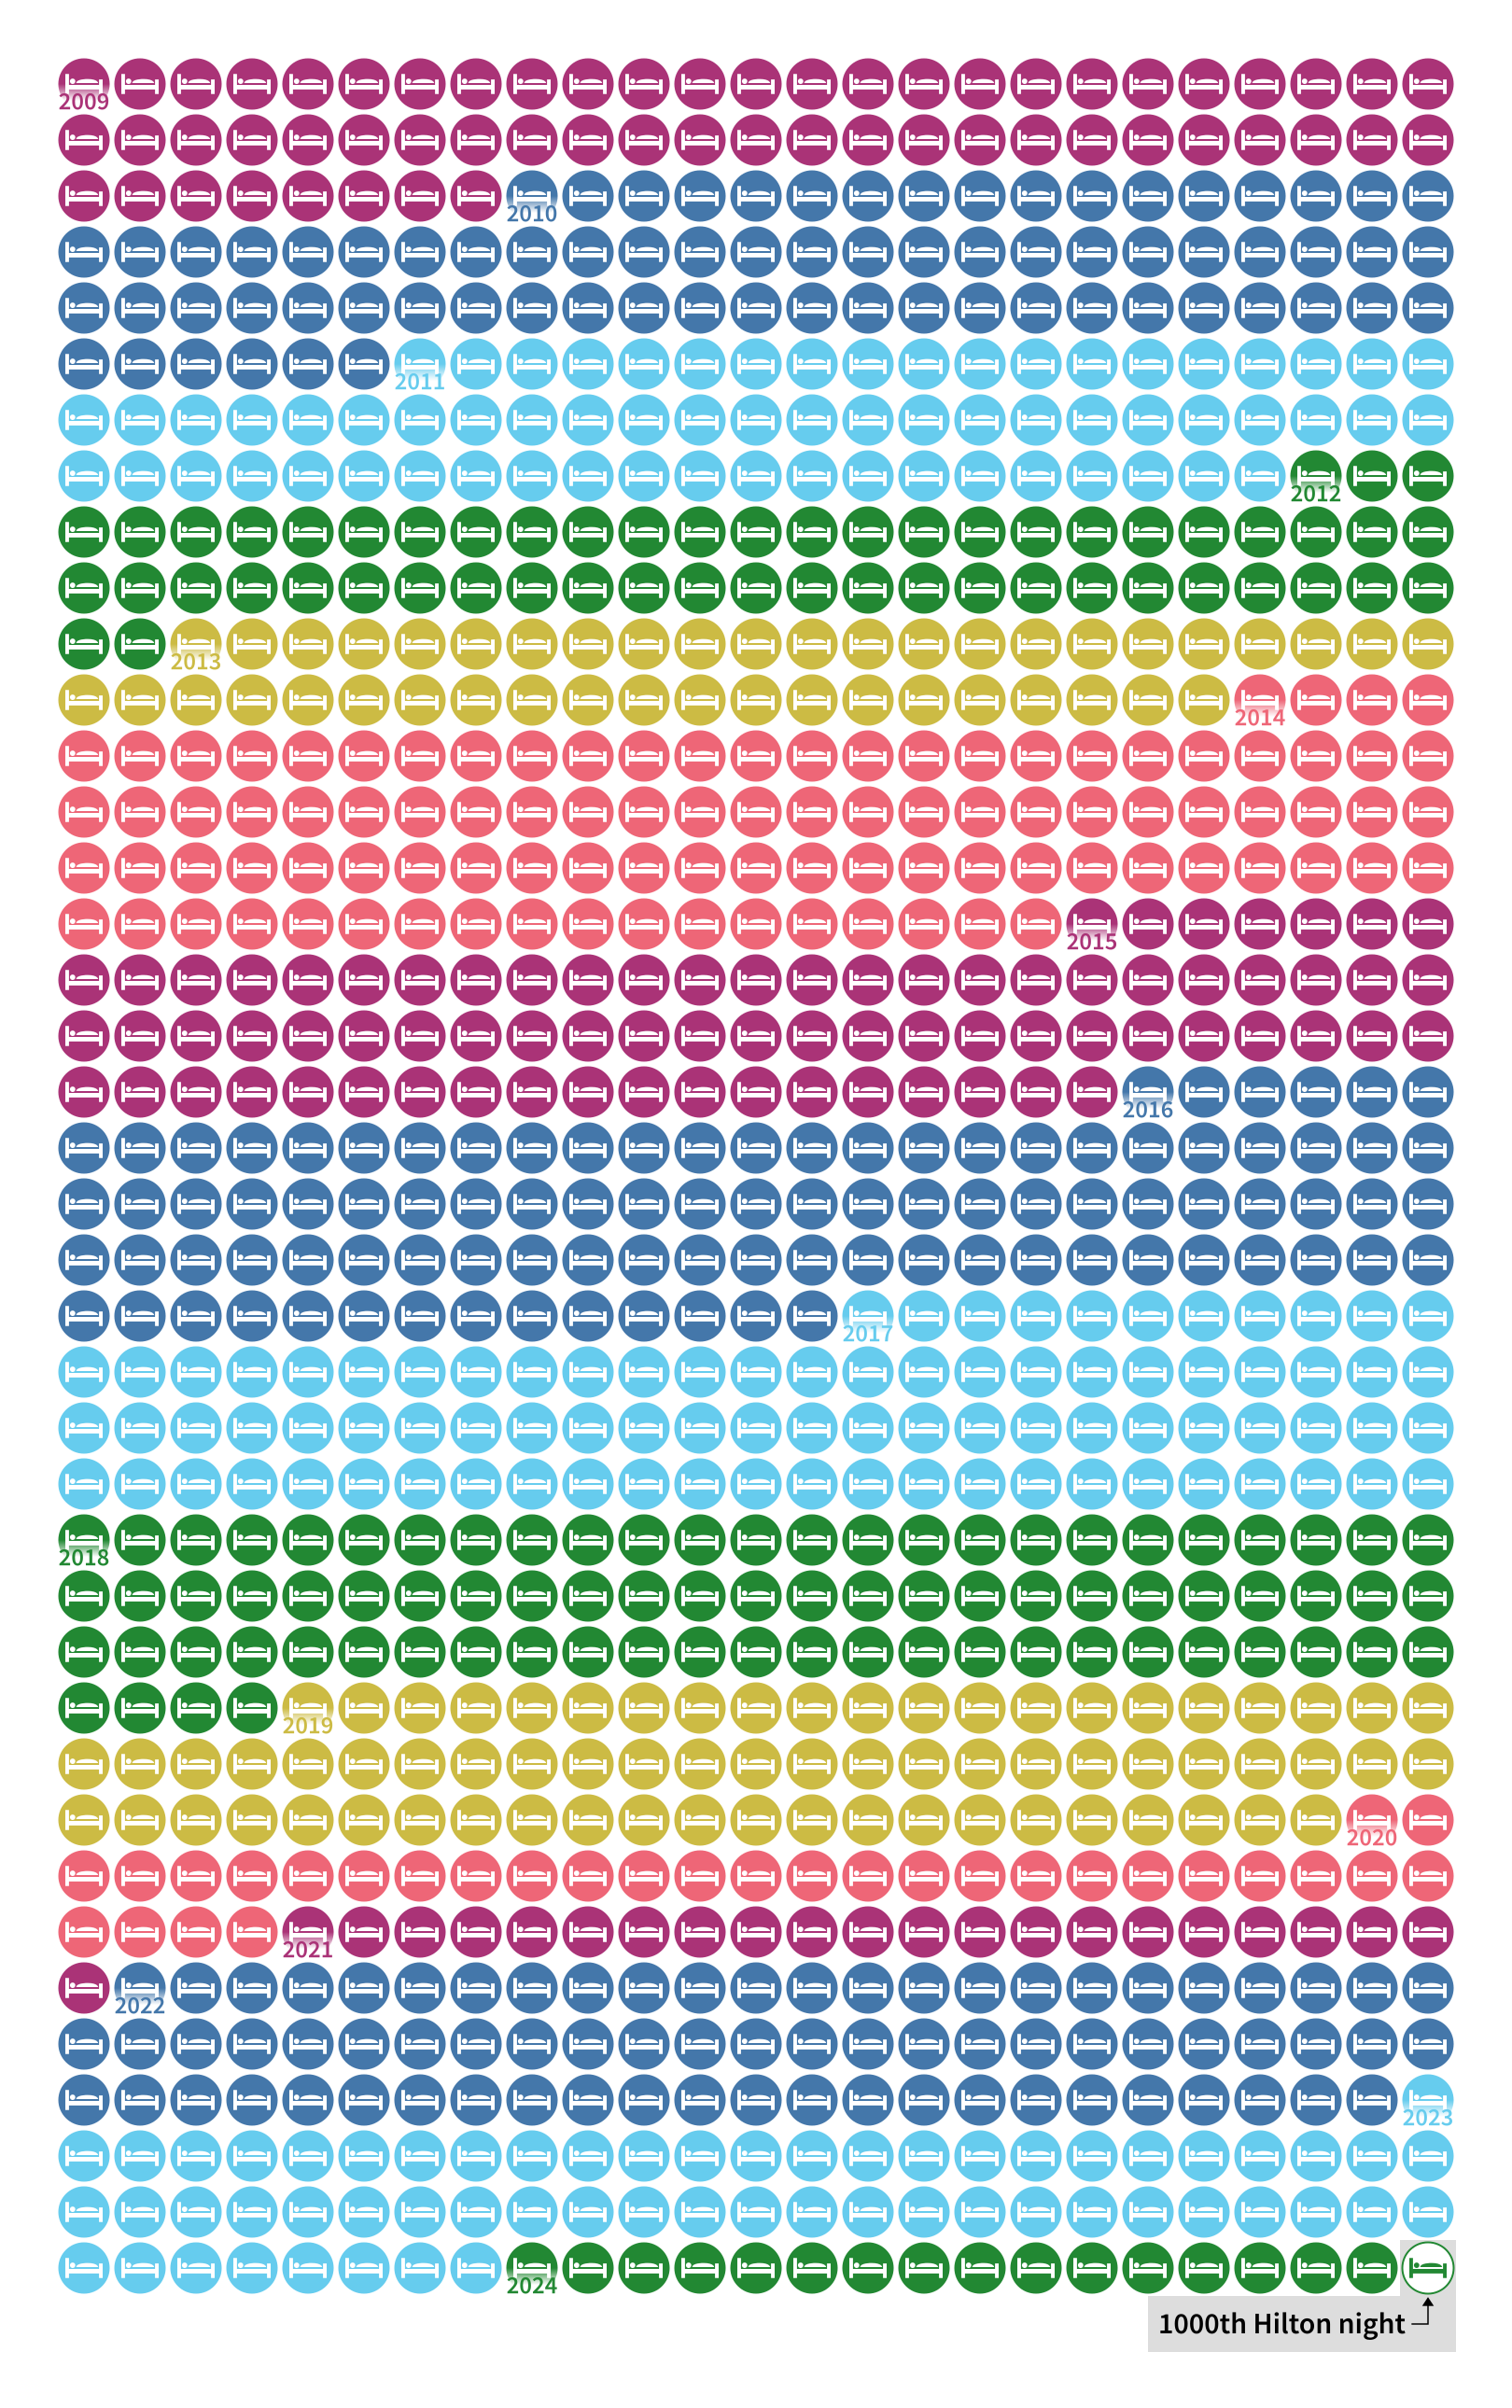 A diagram showing 1000 hotel icons in rows of 25. The icons are color coded by year, and the 1000th icon is highlighted.